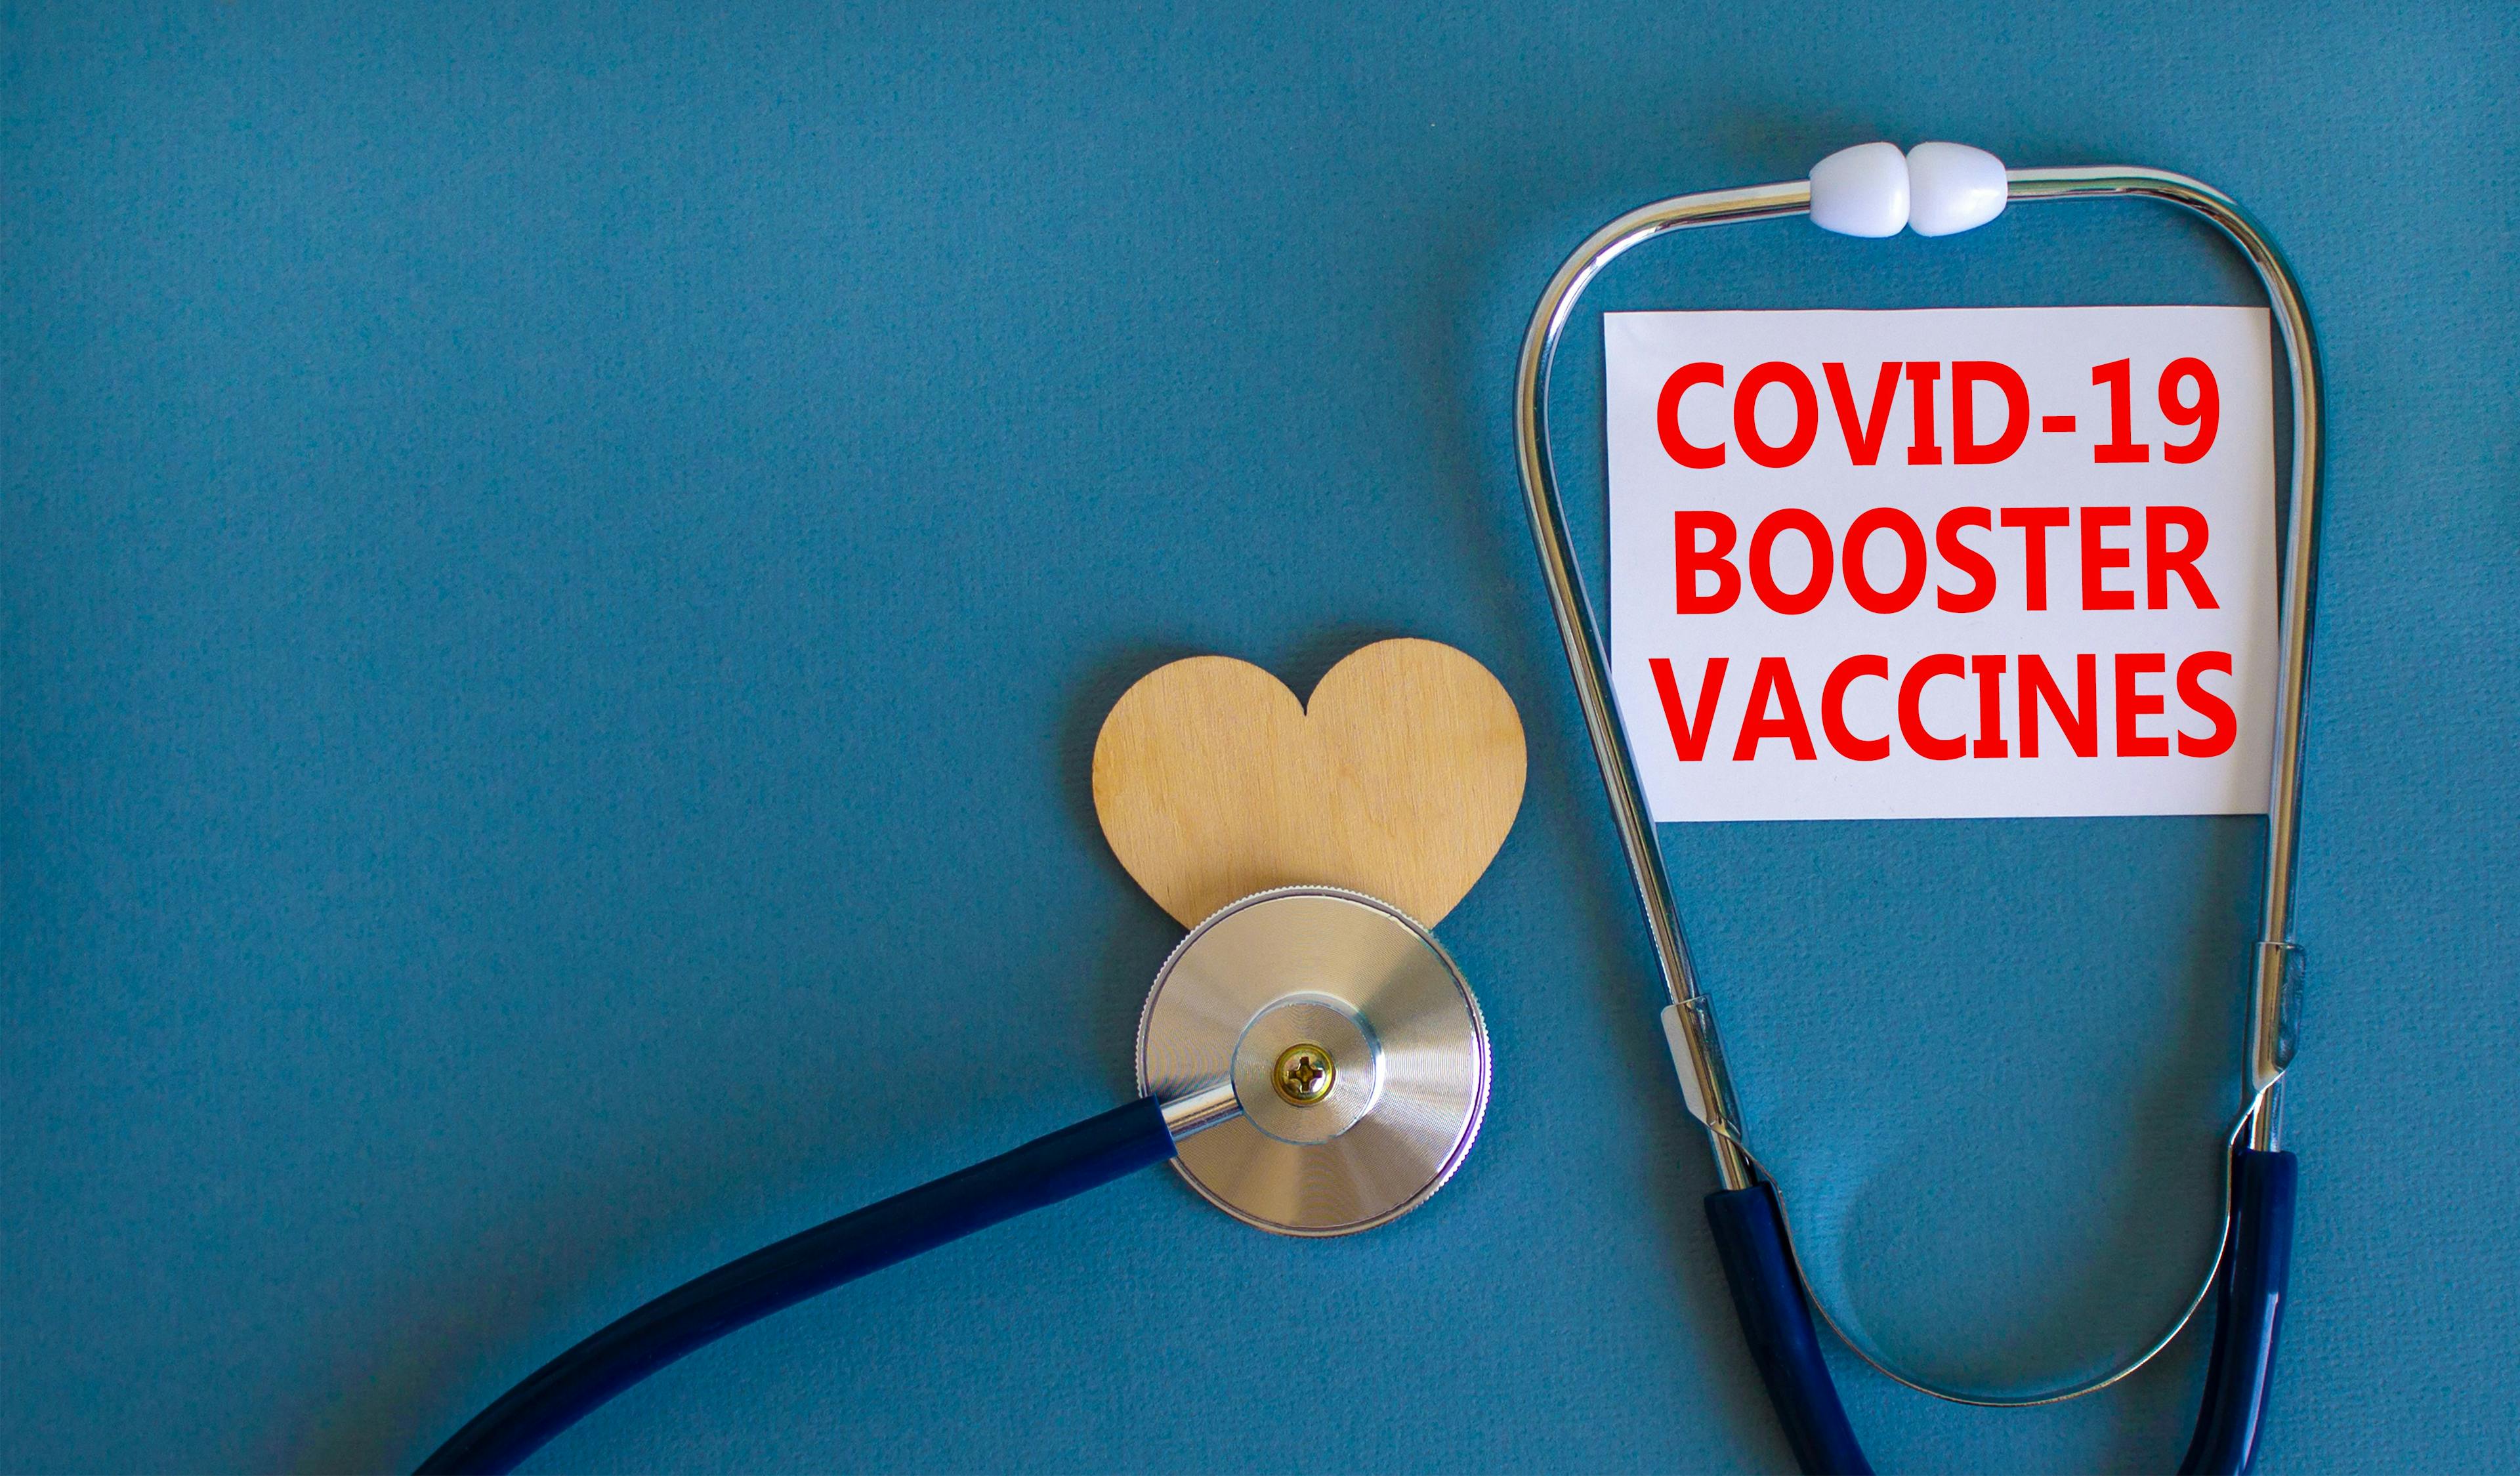 Minimal Stroke Risk with COVID-19 Boosters in Older Adults, Though Concerns Arise When Paired with High-Dose Flu Vaccines